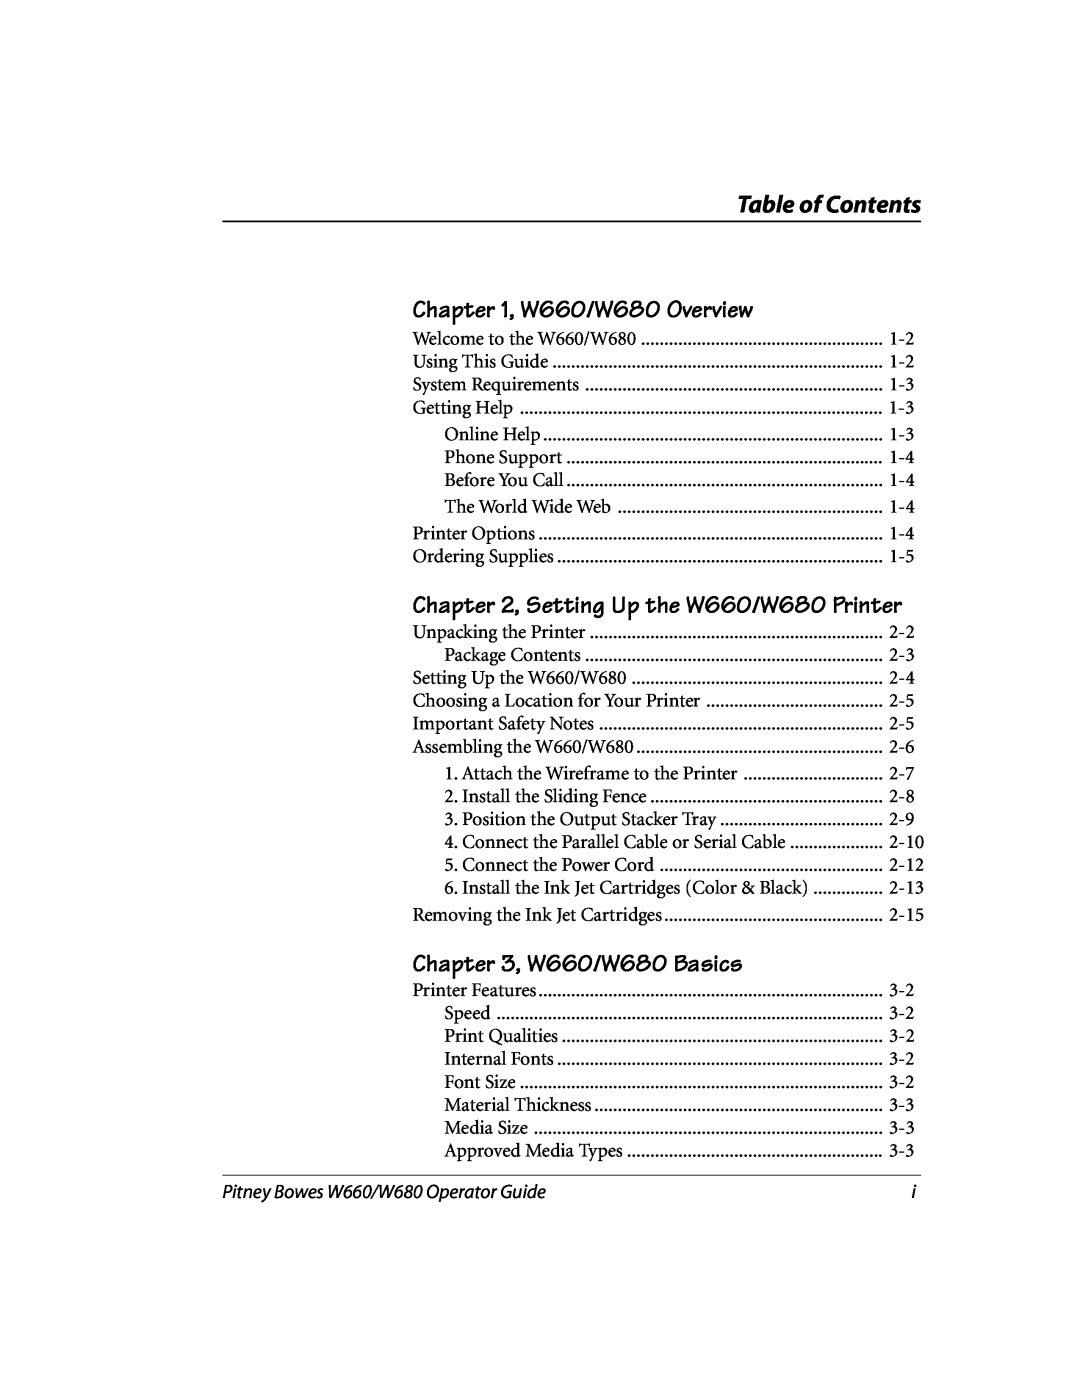 Pitney Bowes manual Table of Contents, W660/W680 Overview, Setting Up the W660/W680 Printer, W660/W680 Basics 